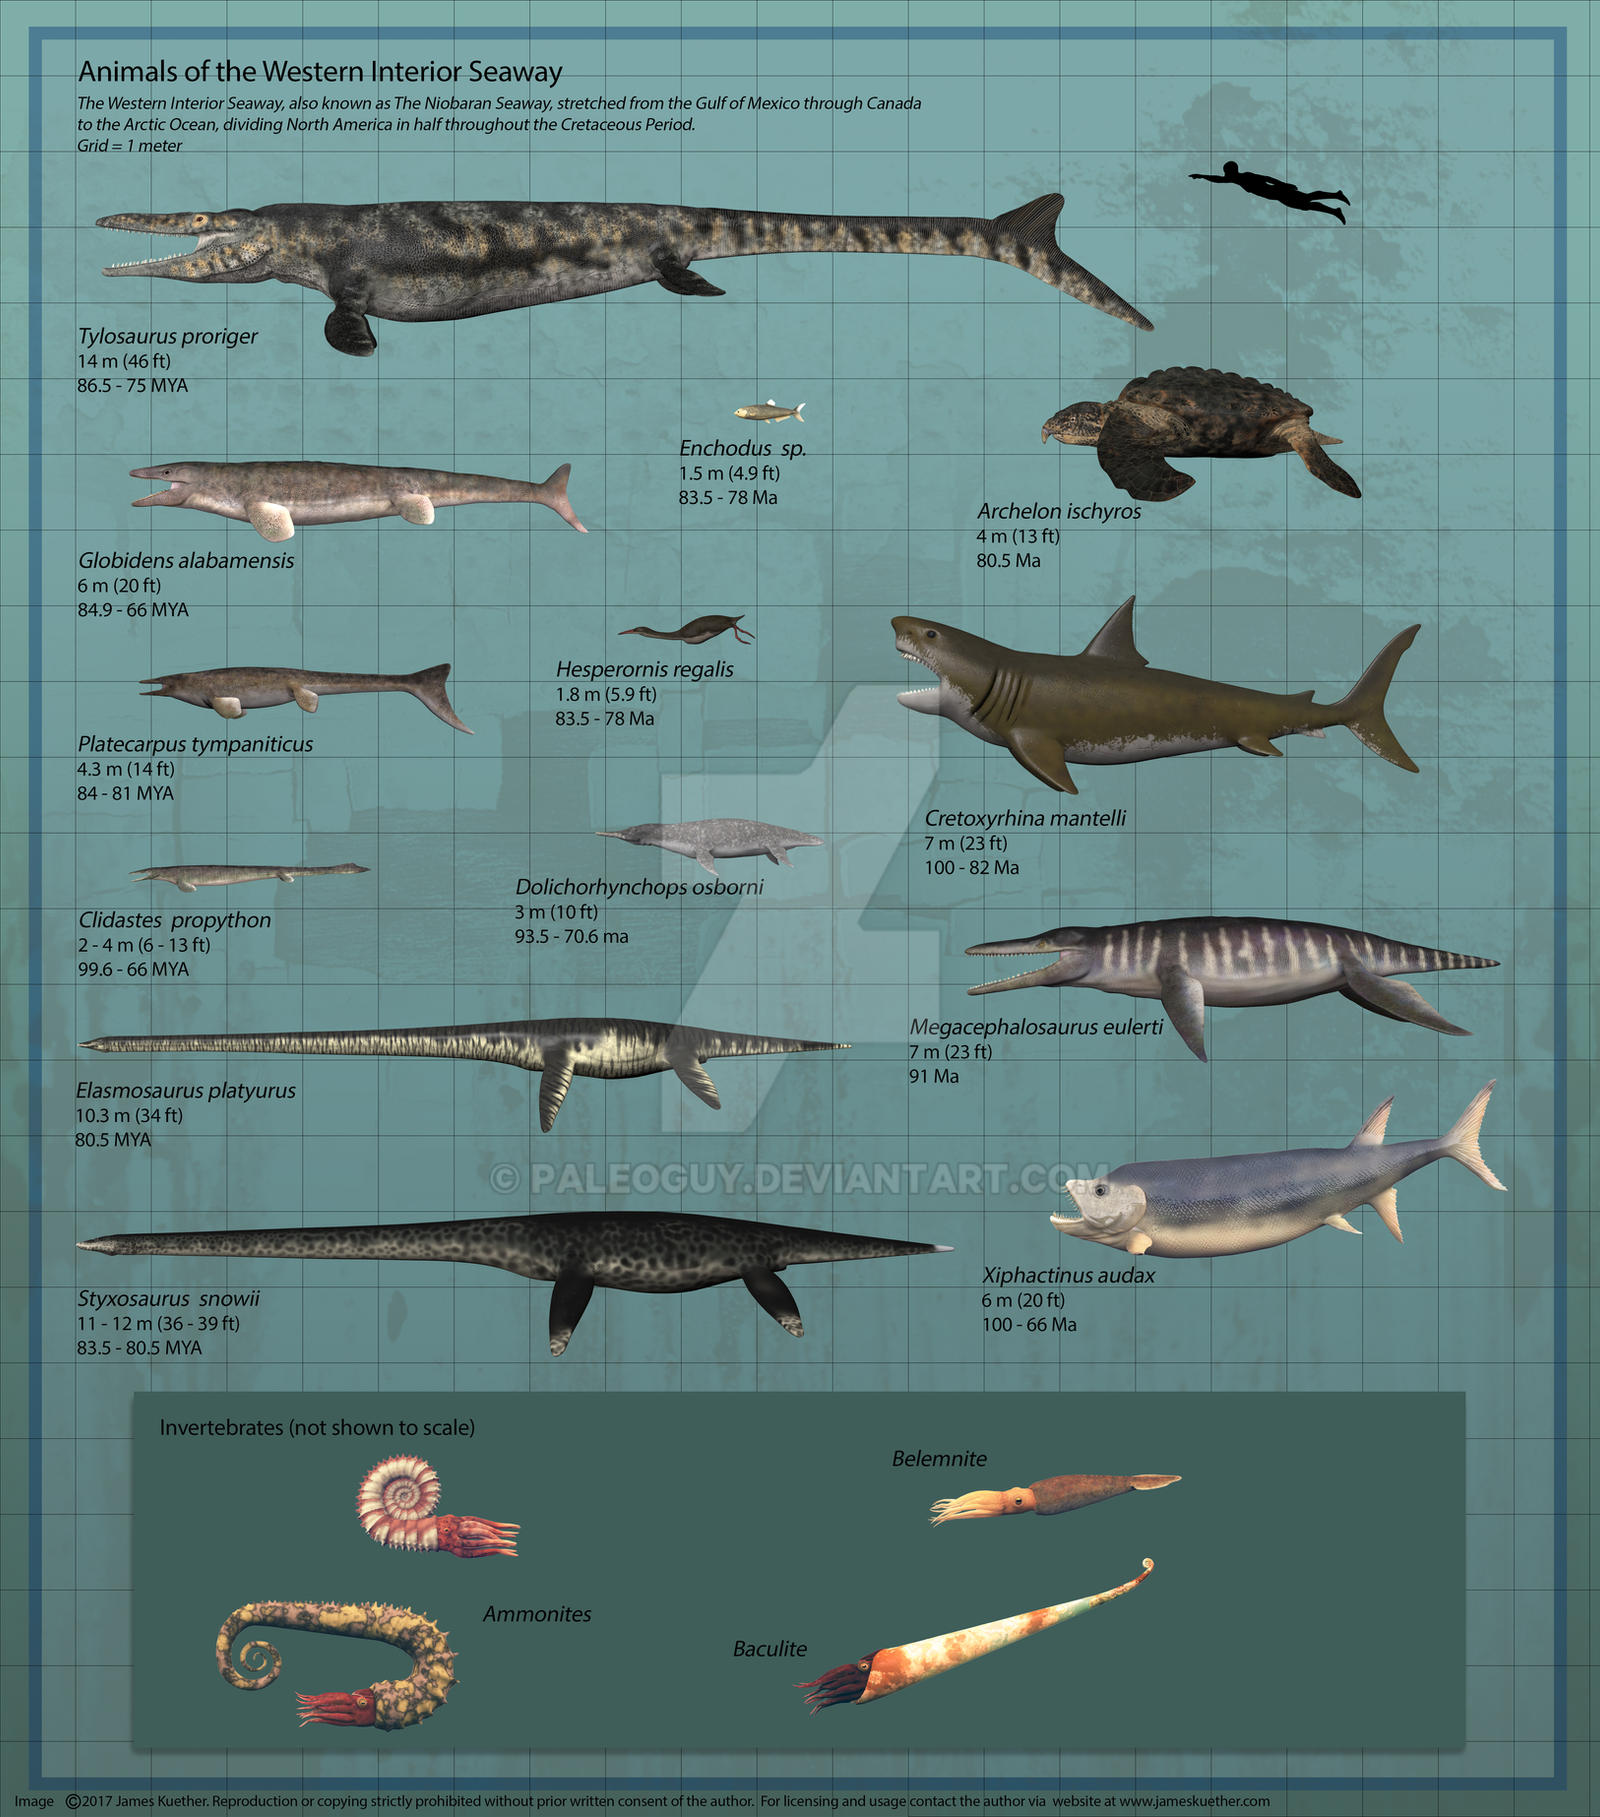 Animals Of The Western Interior Seaway By Paleoguy On Deviantart